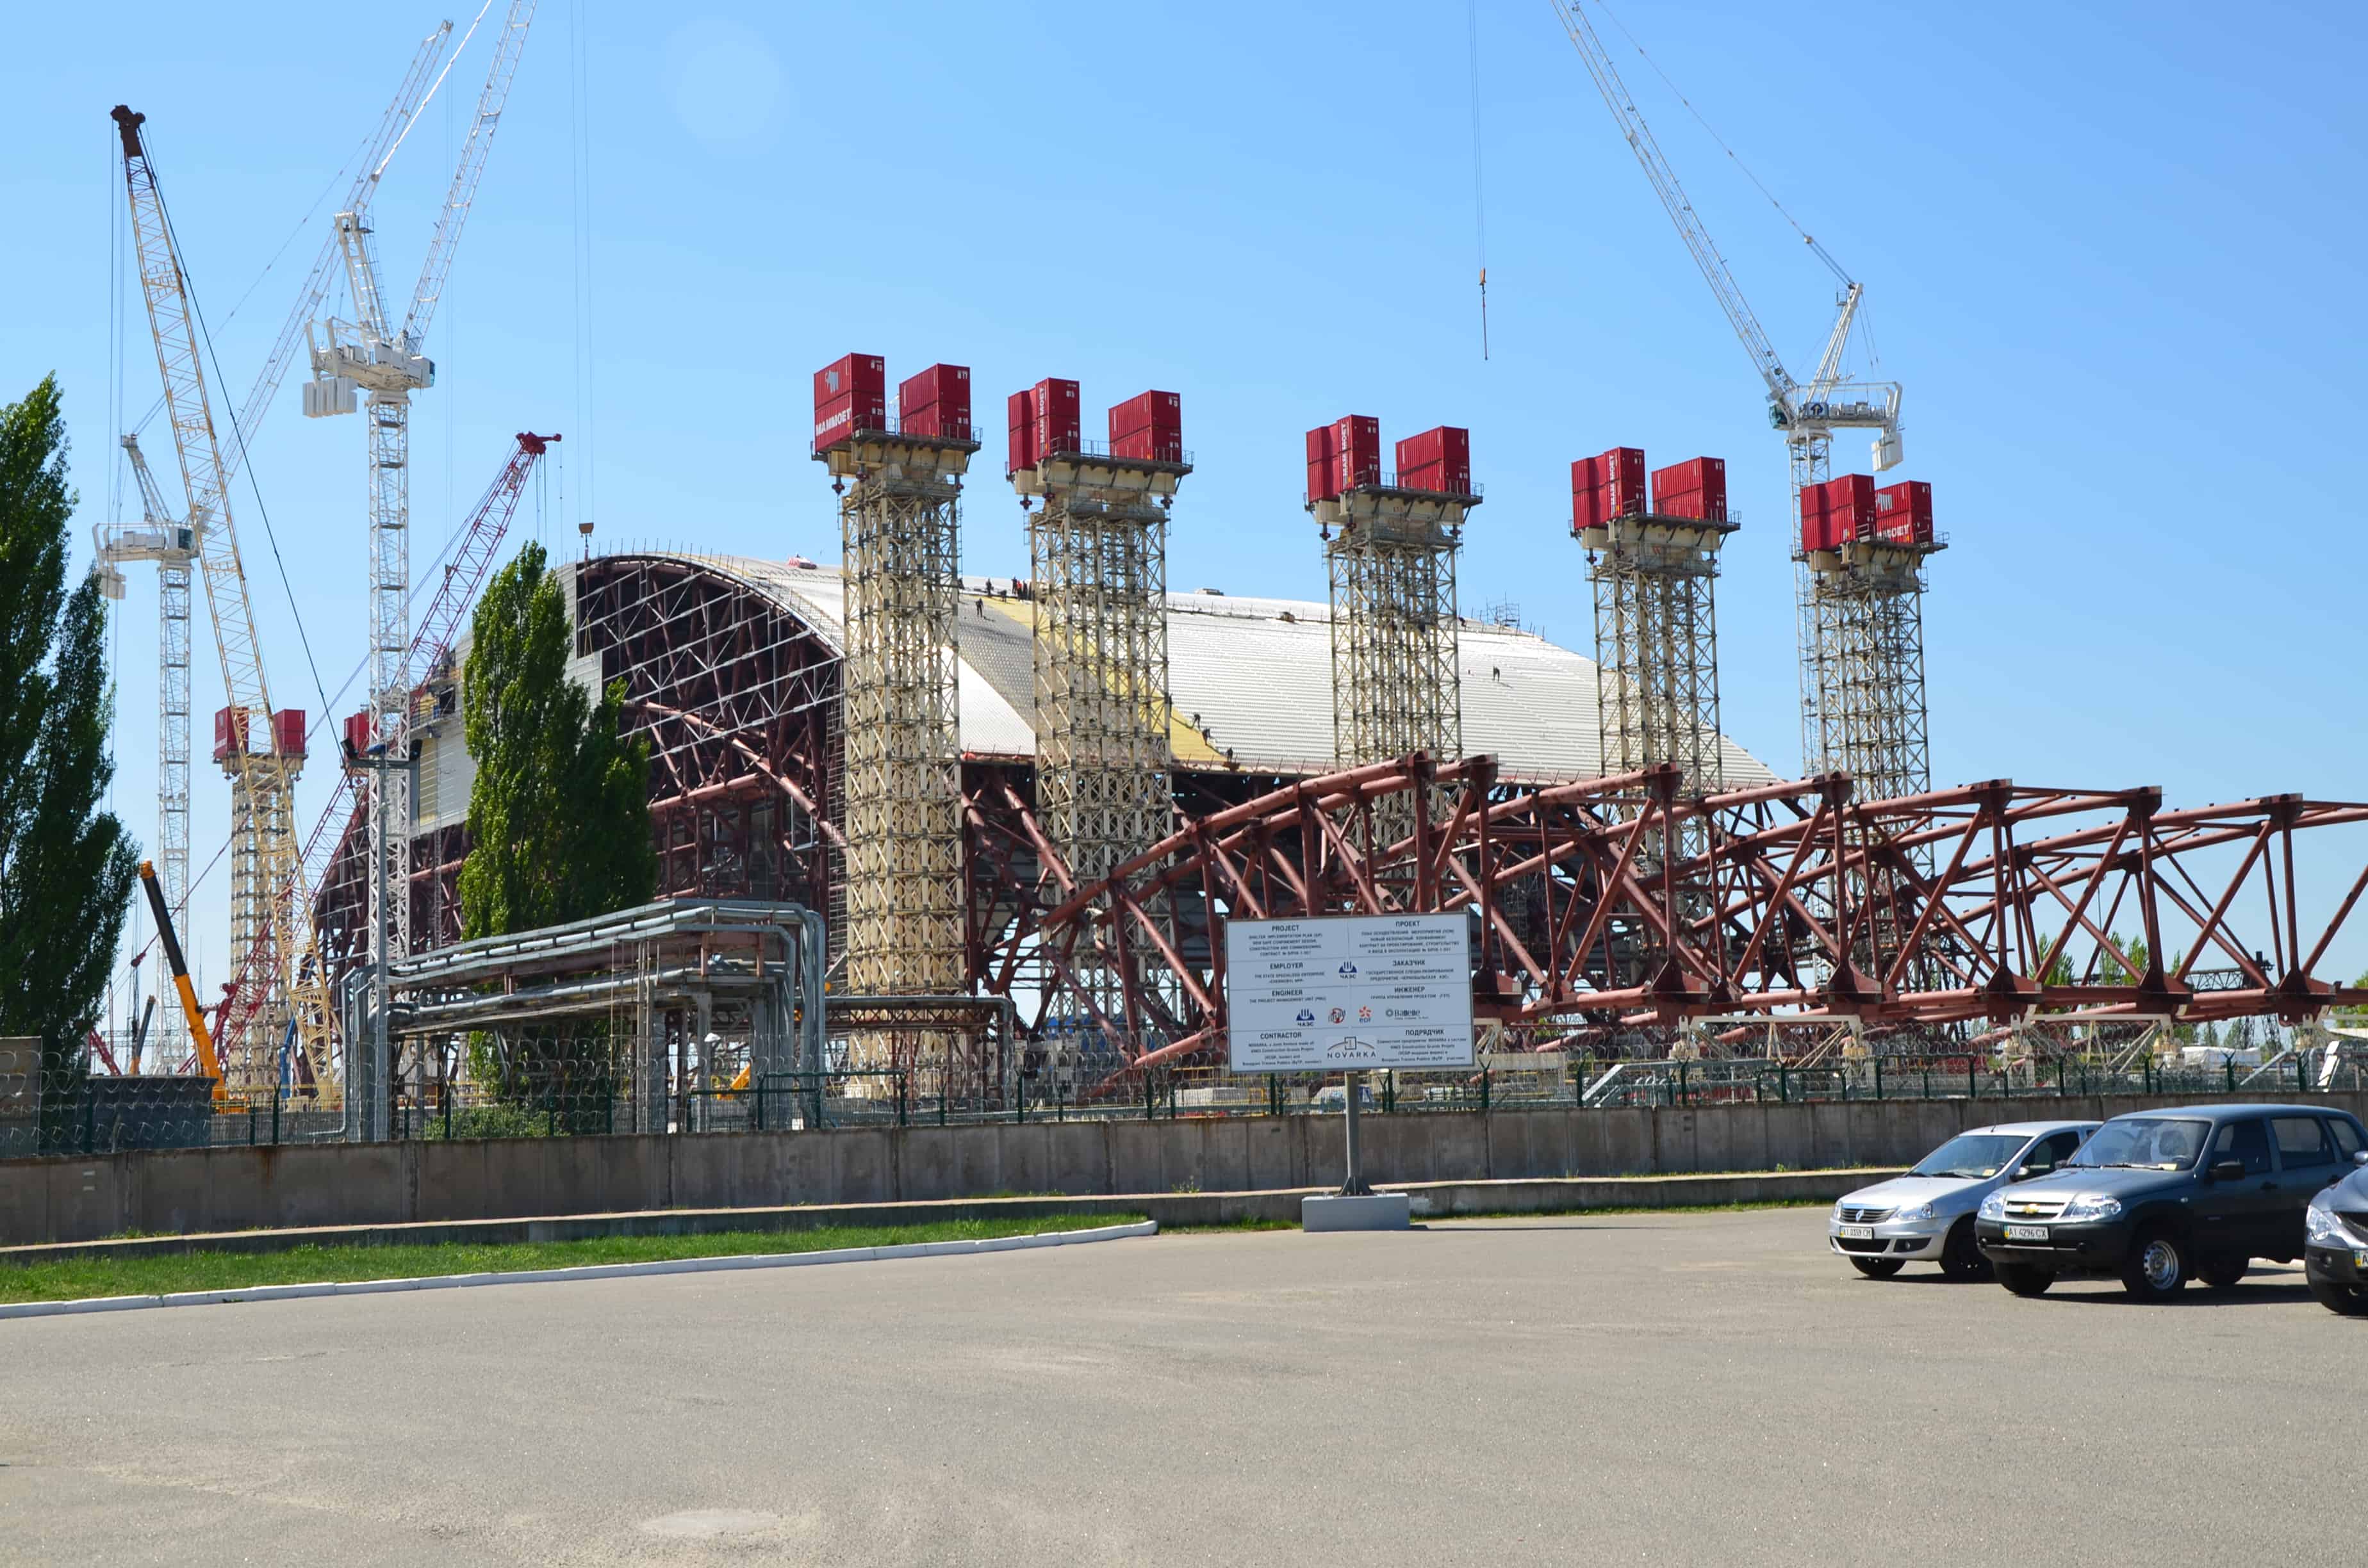 Chernobyl New Safe Confinement at Chernobyl Nuclear Power Plant in Chernobyl Exclusion Zone, Ukraine